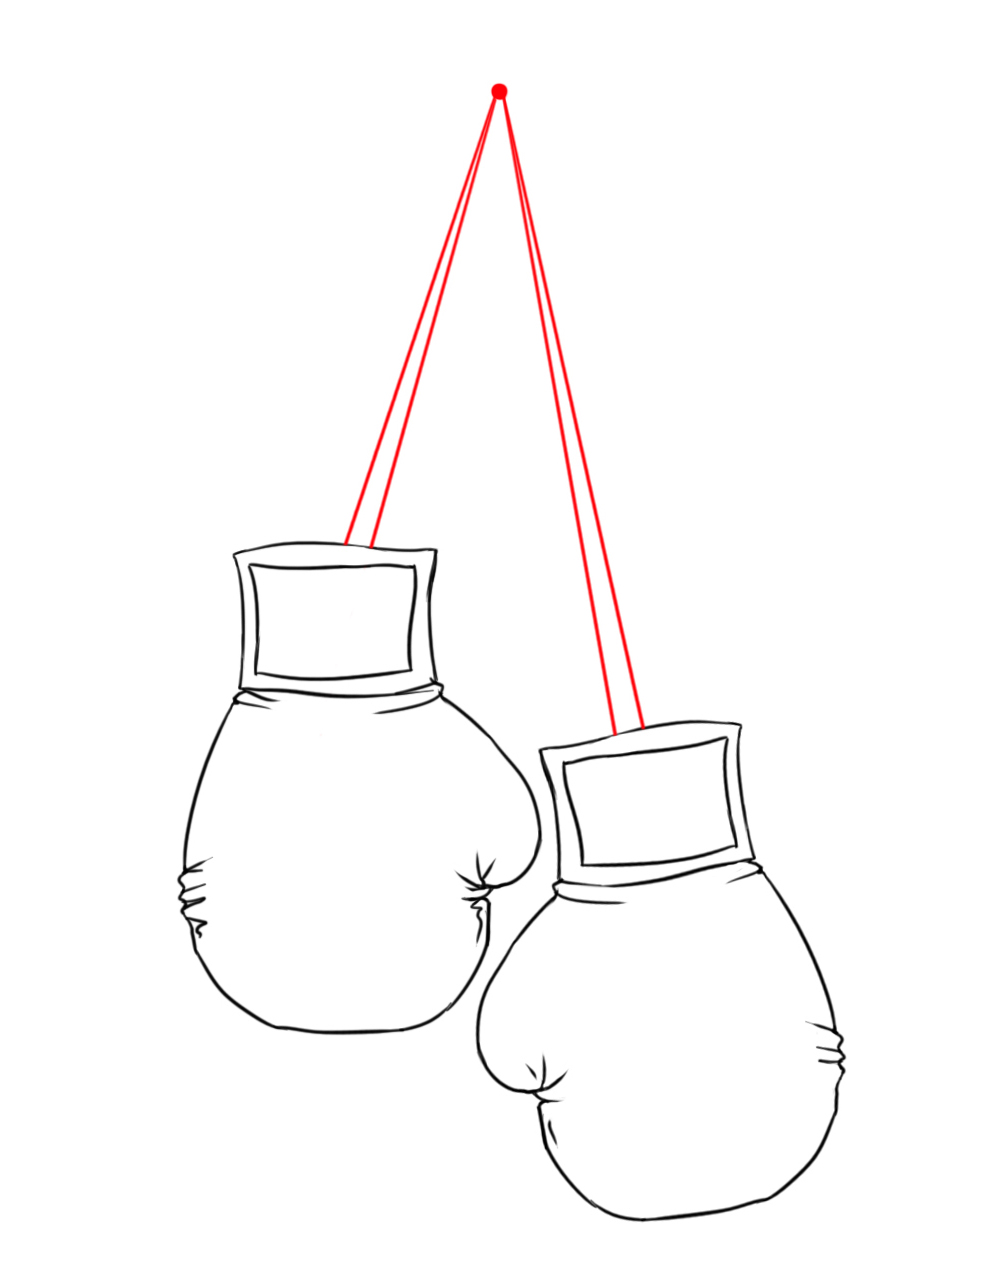 How to Draw Boxing Gloves?